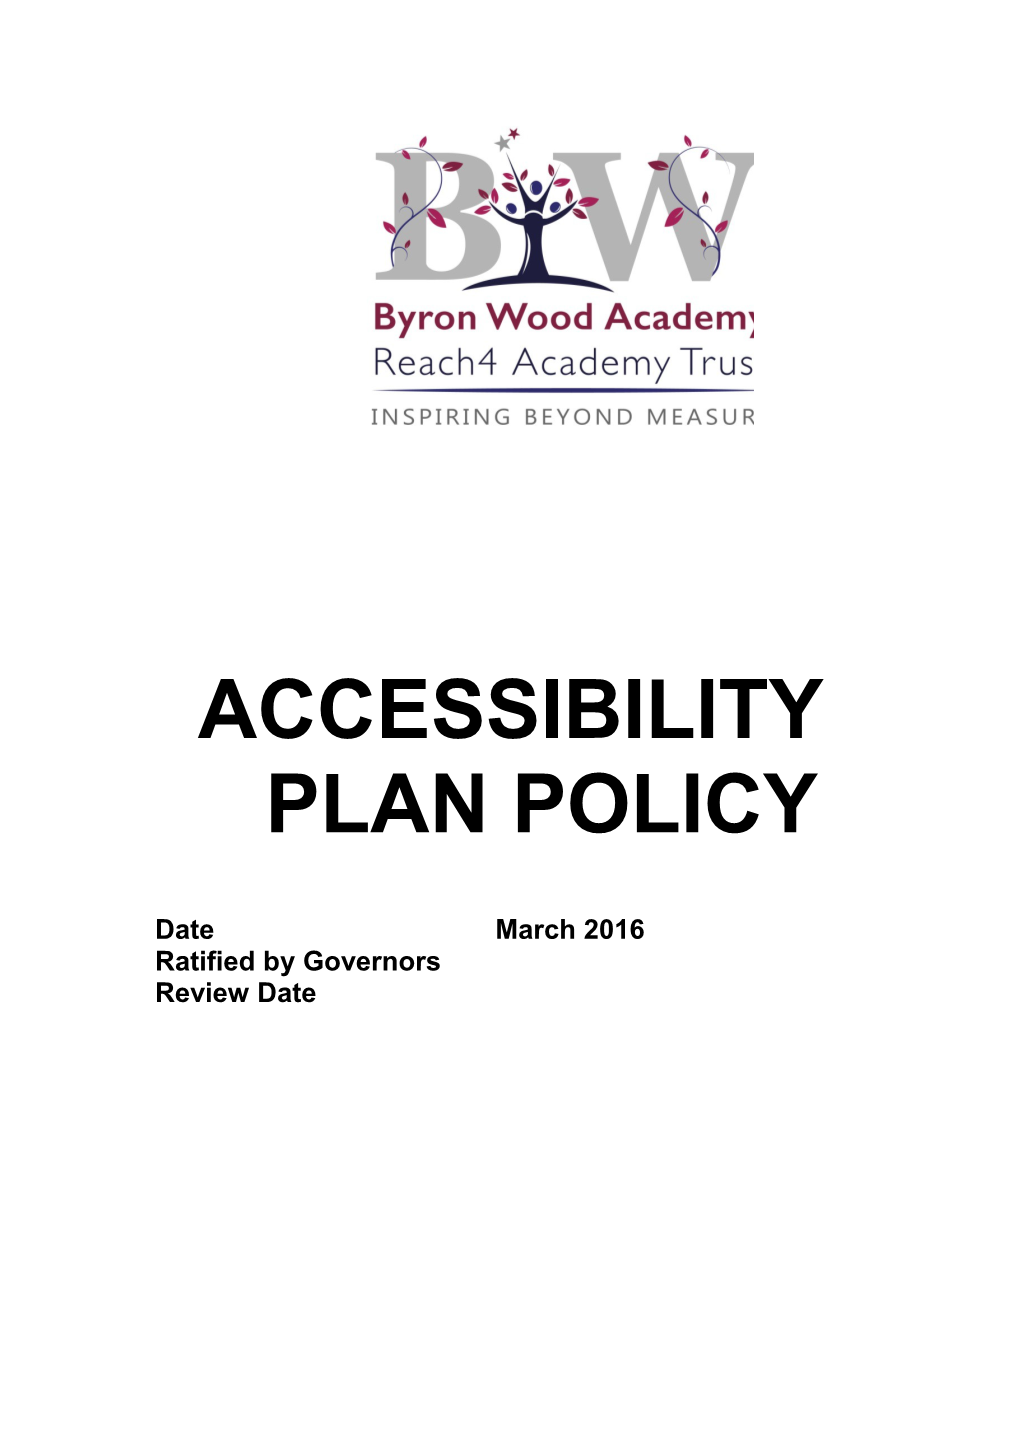 Disability Access Plan and Policy